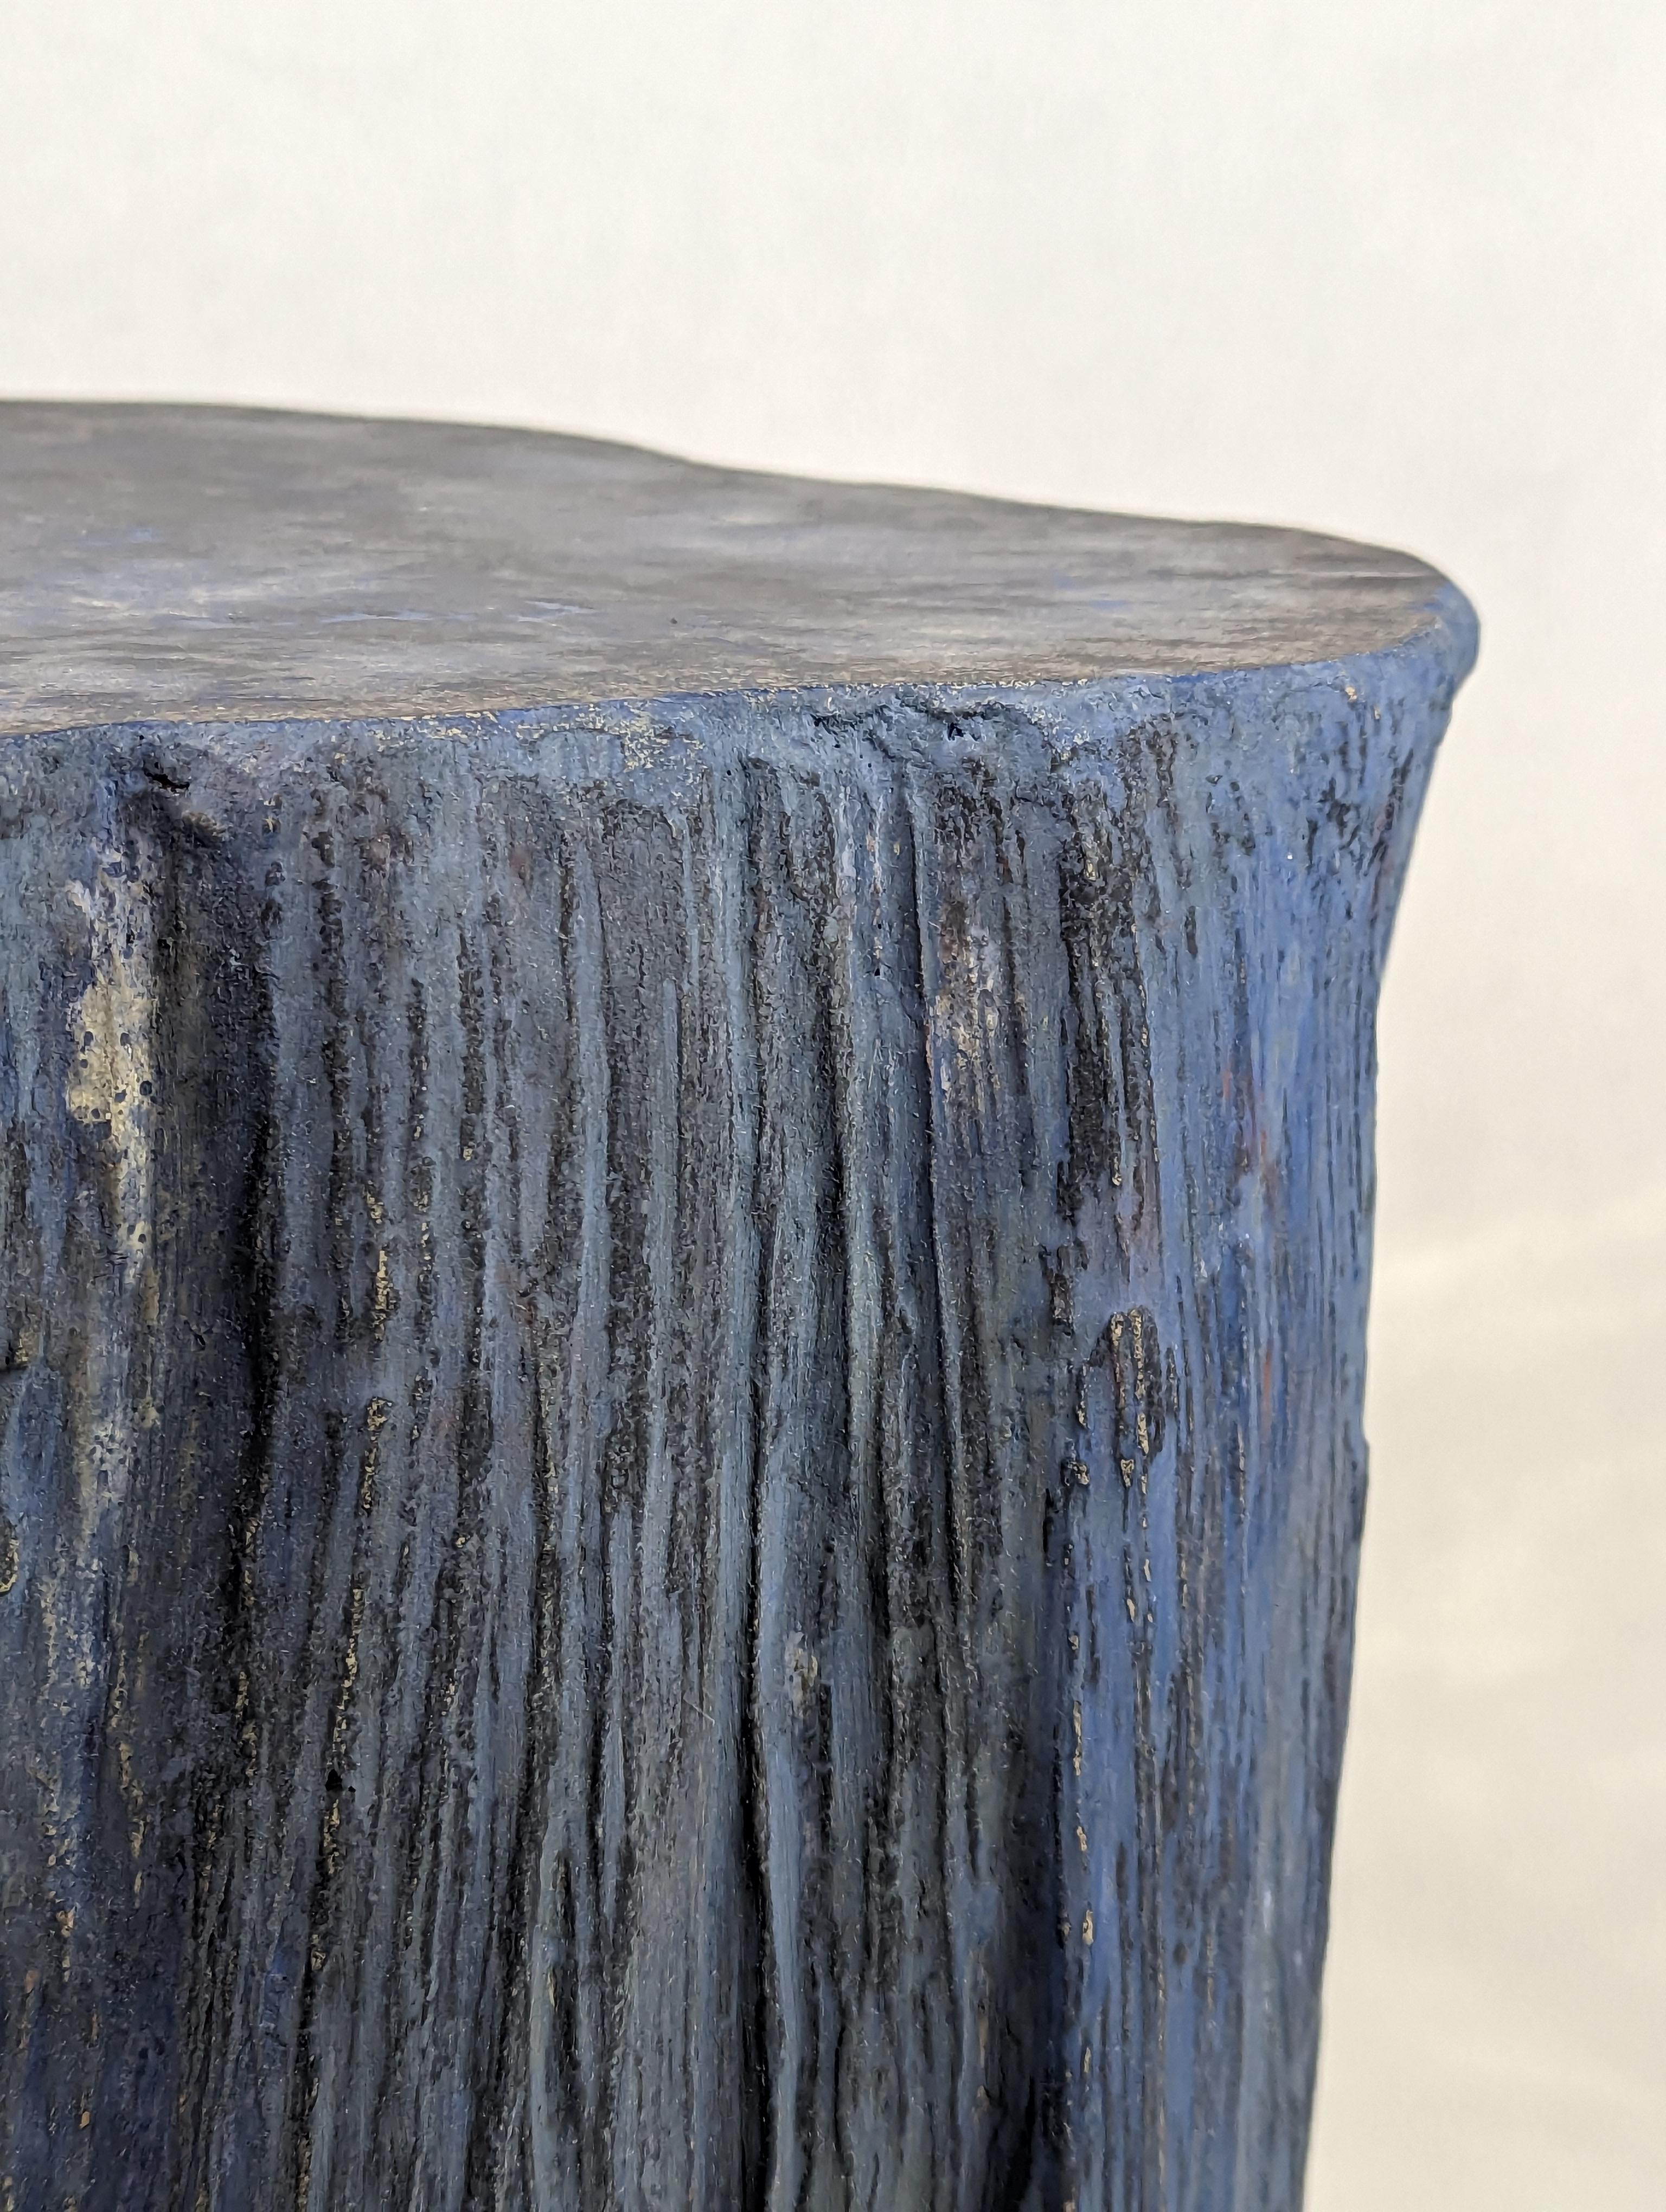 Organic Modern Concrete Palm Stump Side Table In New Condition For Sale In Cazadero, CA